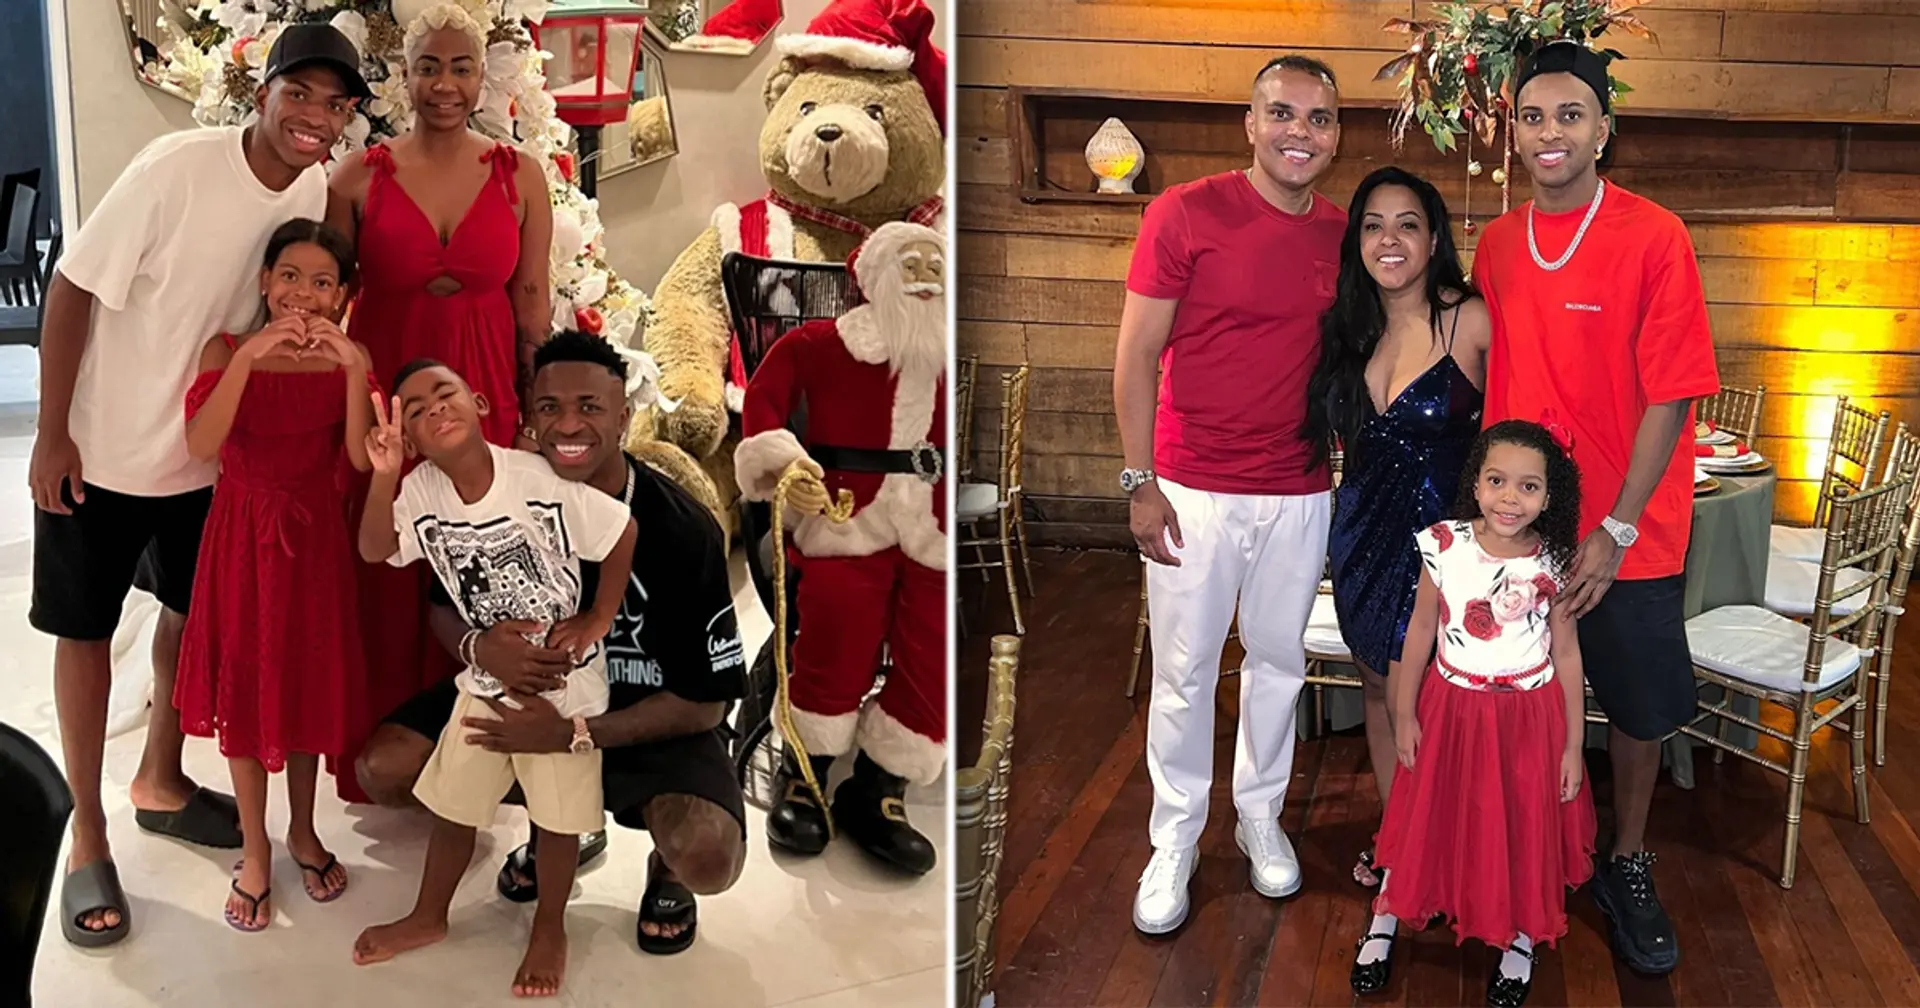 Casillas, Vinicius and others: 9 best pics of Real Madrid players and legends celebrating Christmas